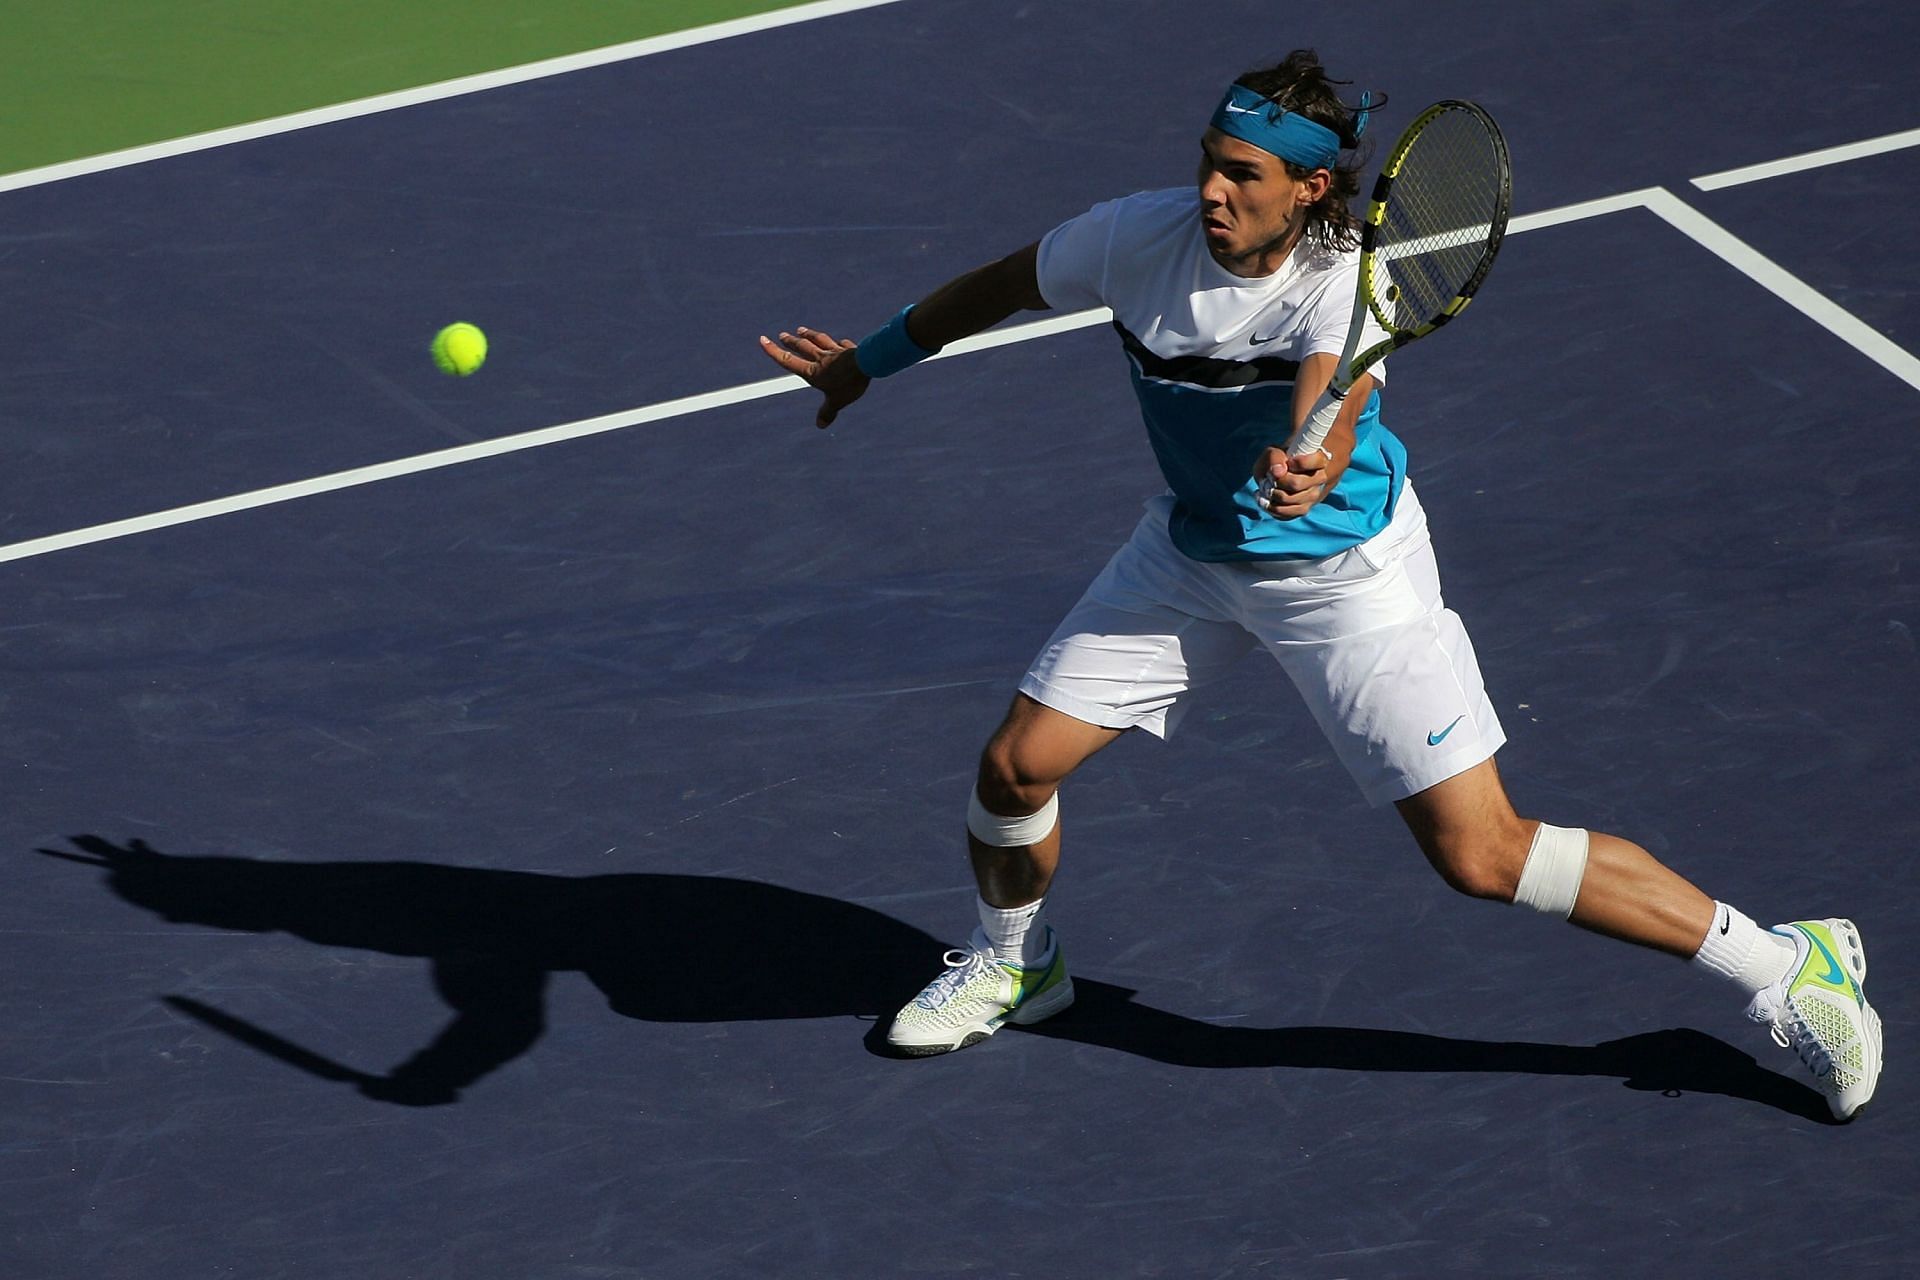 The Spaniard was in stunning form at the 2009 Indian Wells Masters.